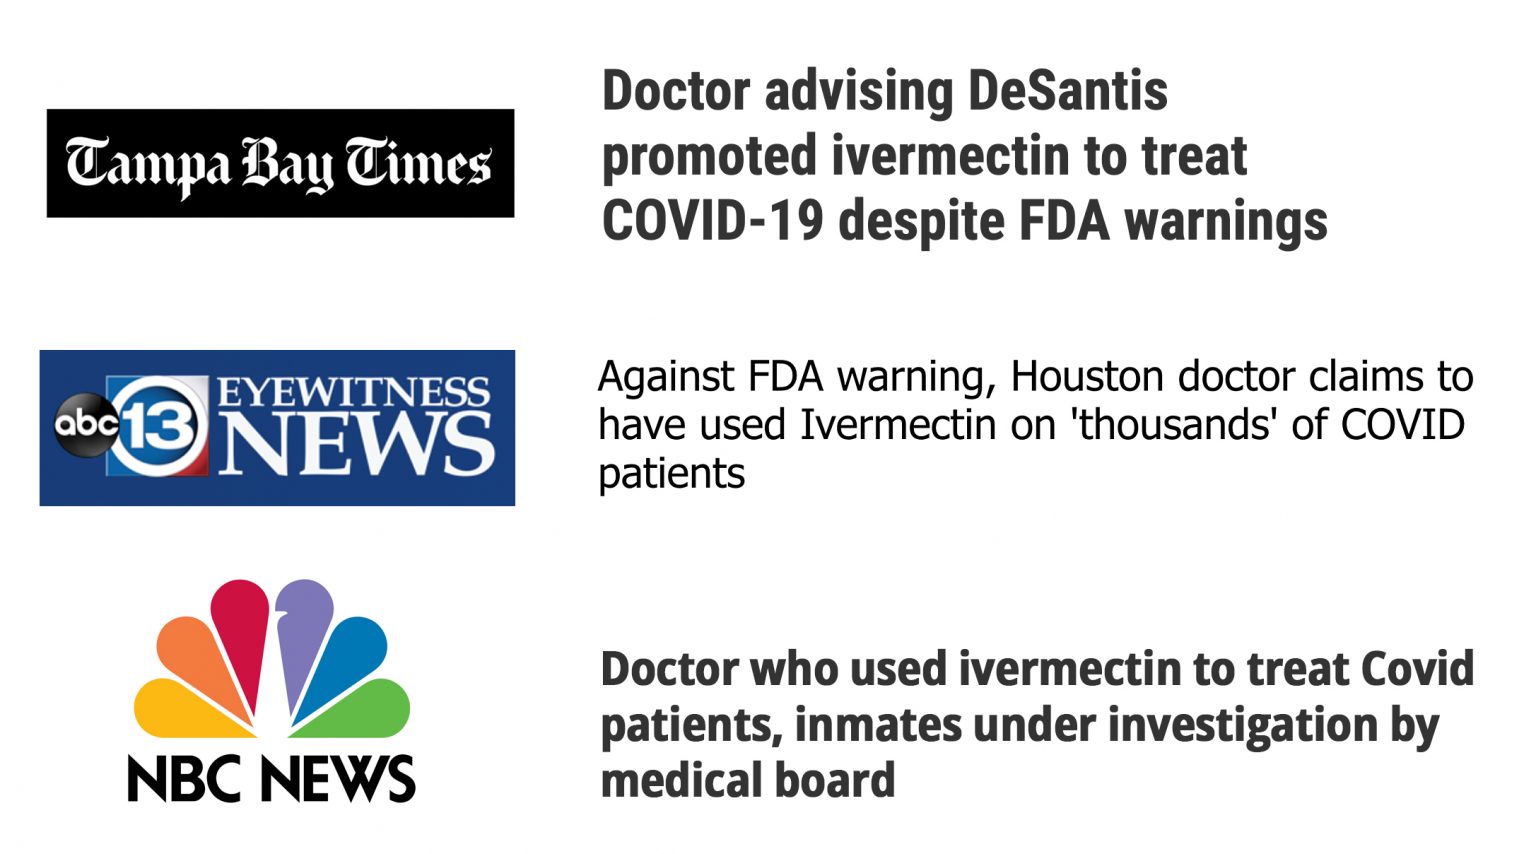 THE EXTRAORDINARY STORY OF HOW GOVERNMENTS SUPPRESSED EFFECTIVE COVID TREATMENTS AND TARGETED PHYSICIANS WHO PRESCRIBED THEM Doctors-Prescribed-Ivermectin-headlines-1536x854-1